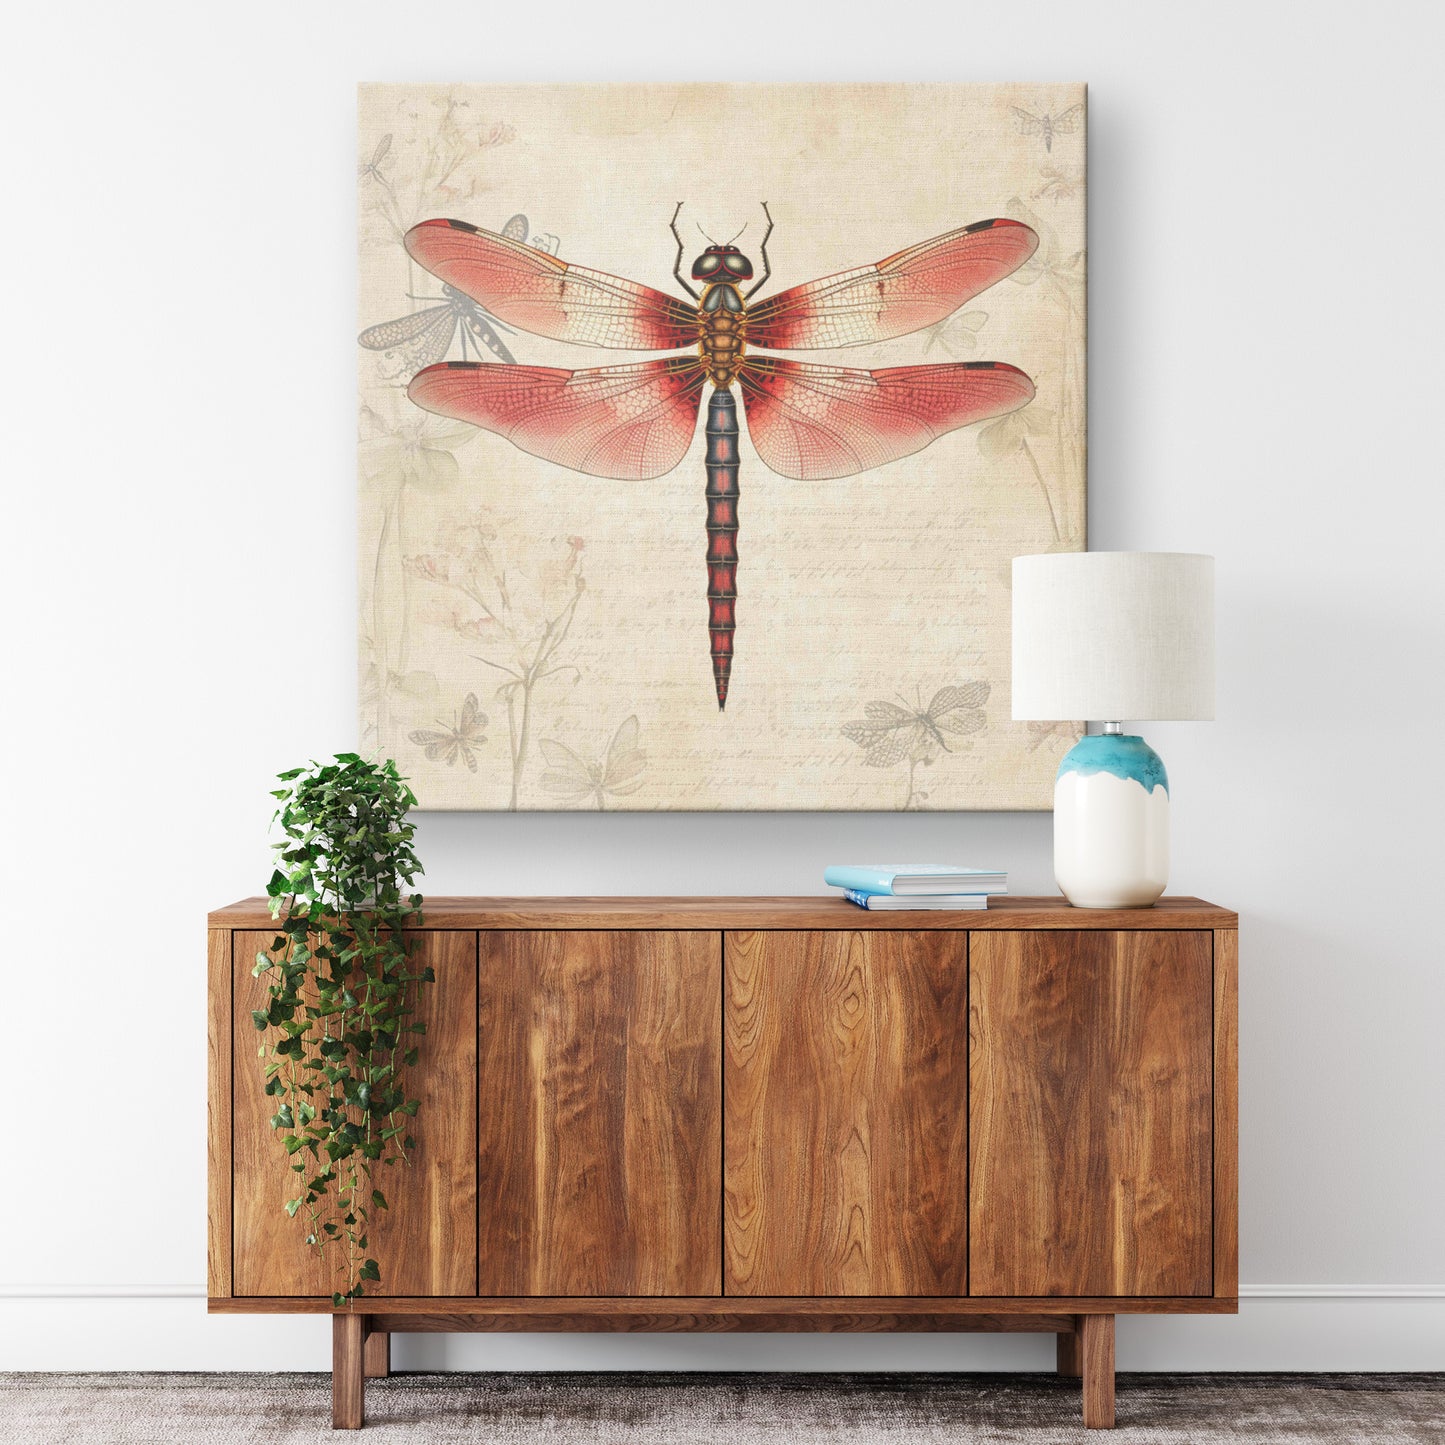 Vintage Dragonfly Canvas Art Print - Red